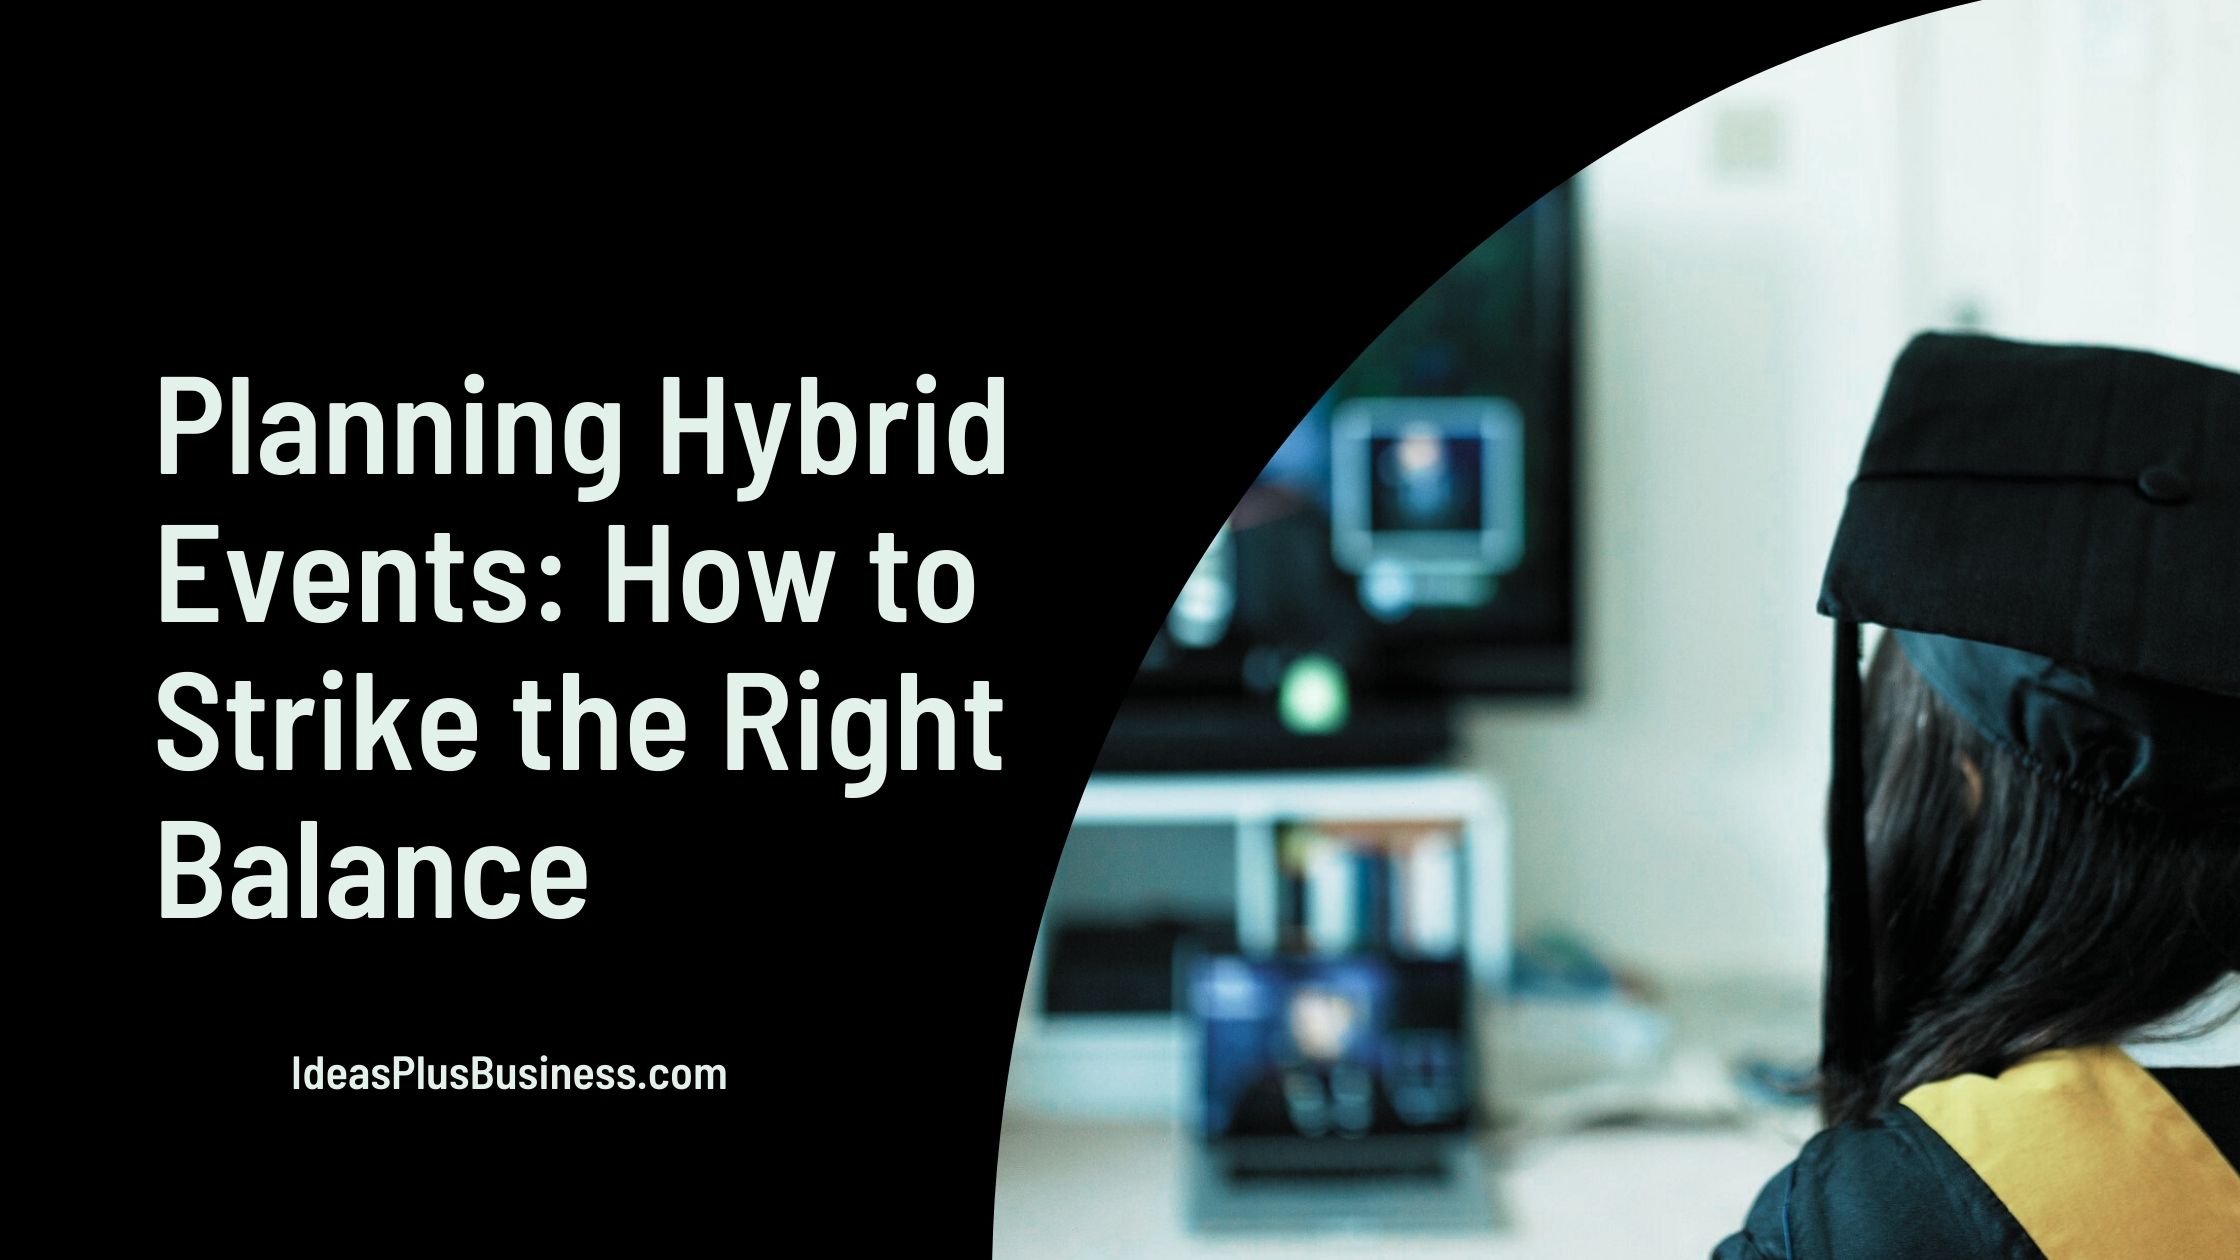 Planning Hybrid Events: How to Strike the Right Balance